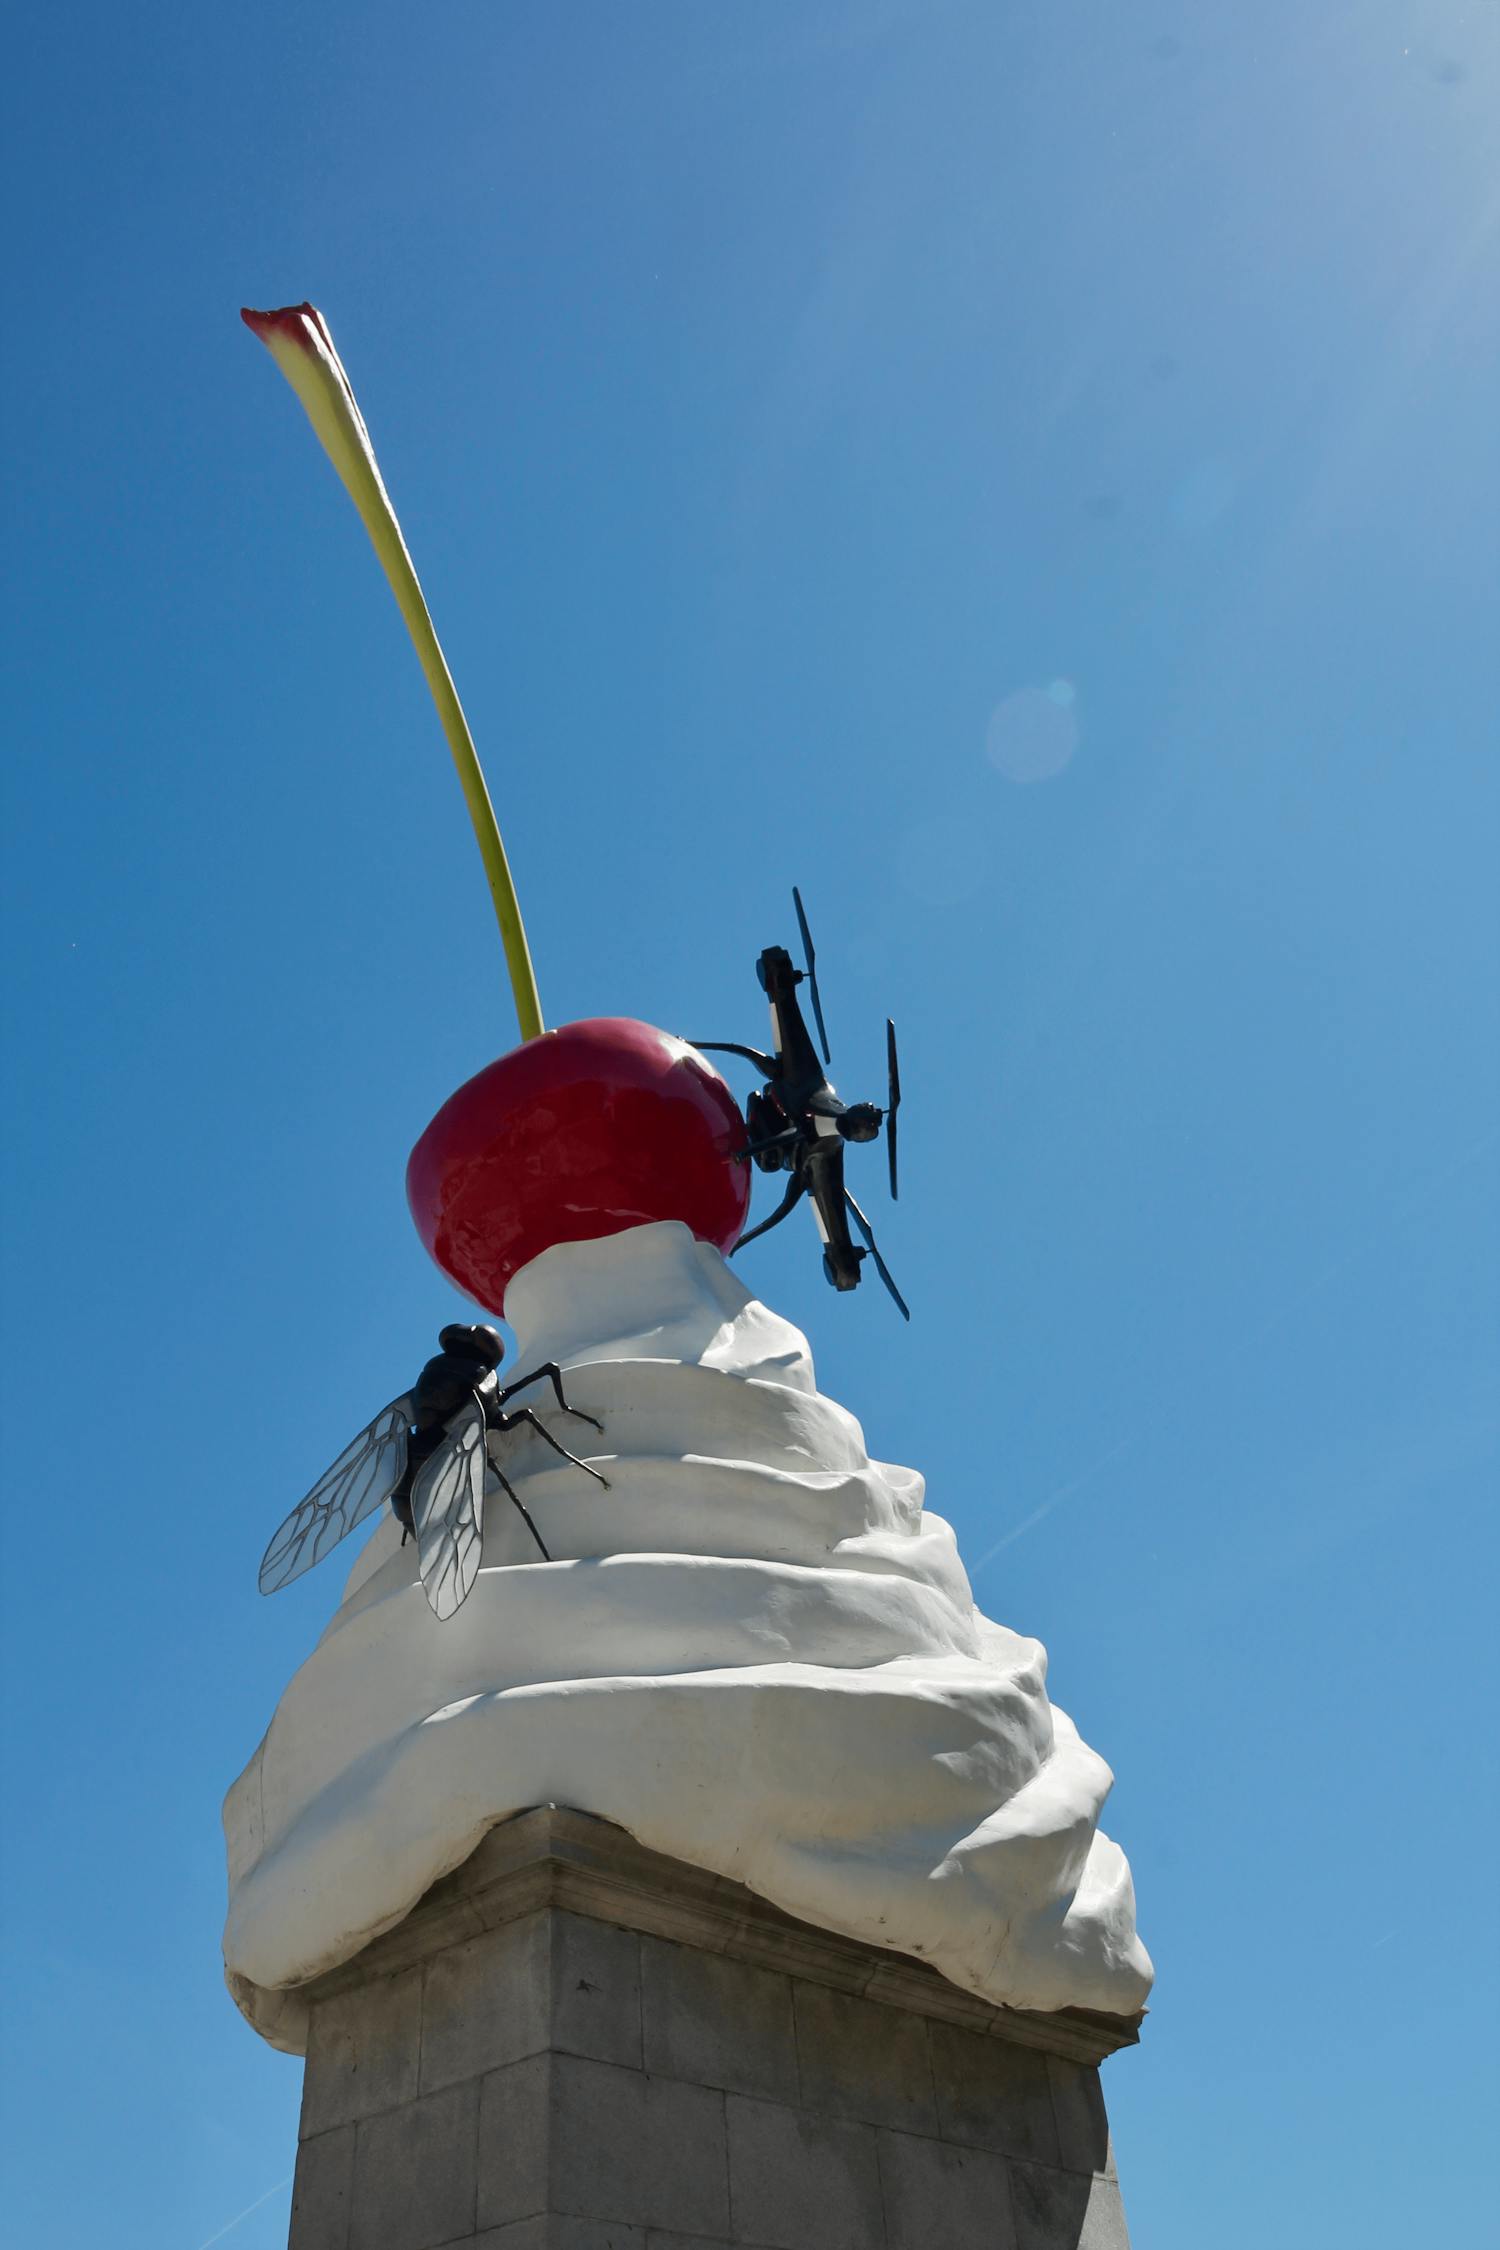 [ID: This photograph shows a sculpture in the form of a pile of white cream topped with a red cherry with a tall green stem. A black fly clings onto the cream while a black drone is perched on the side of the cherry. The sculpture is placed on top of a rectangular grey stone plinth against a background of a blue, cloudless sky. End of ID]